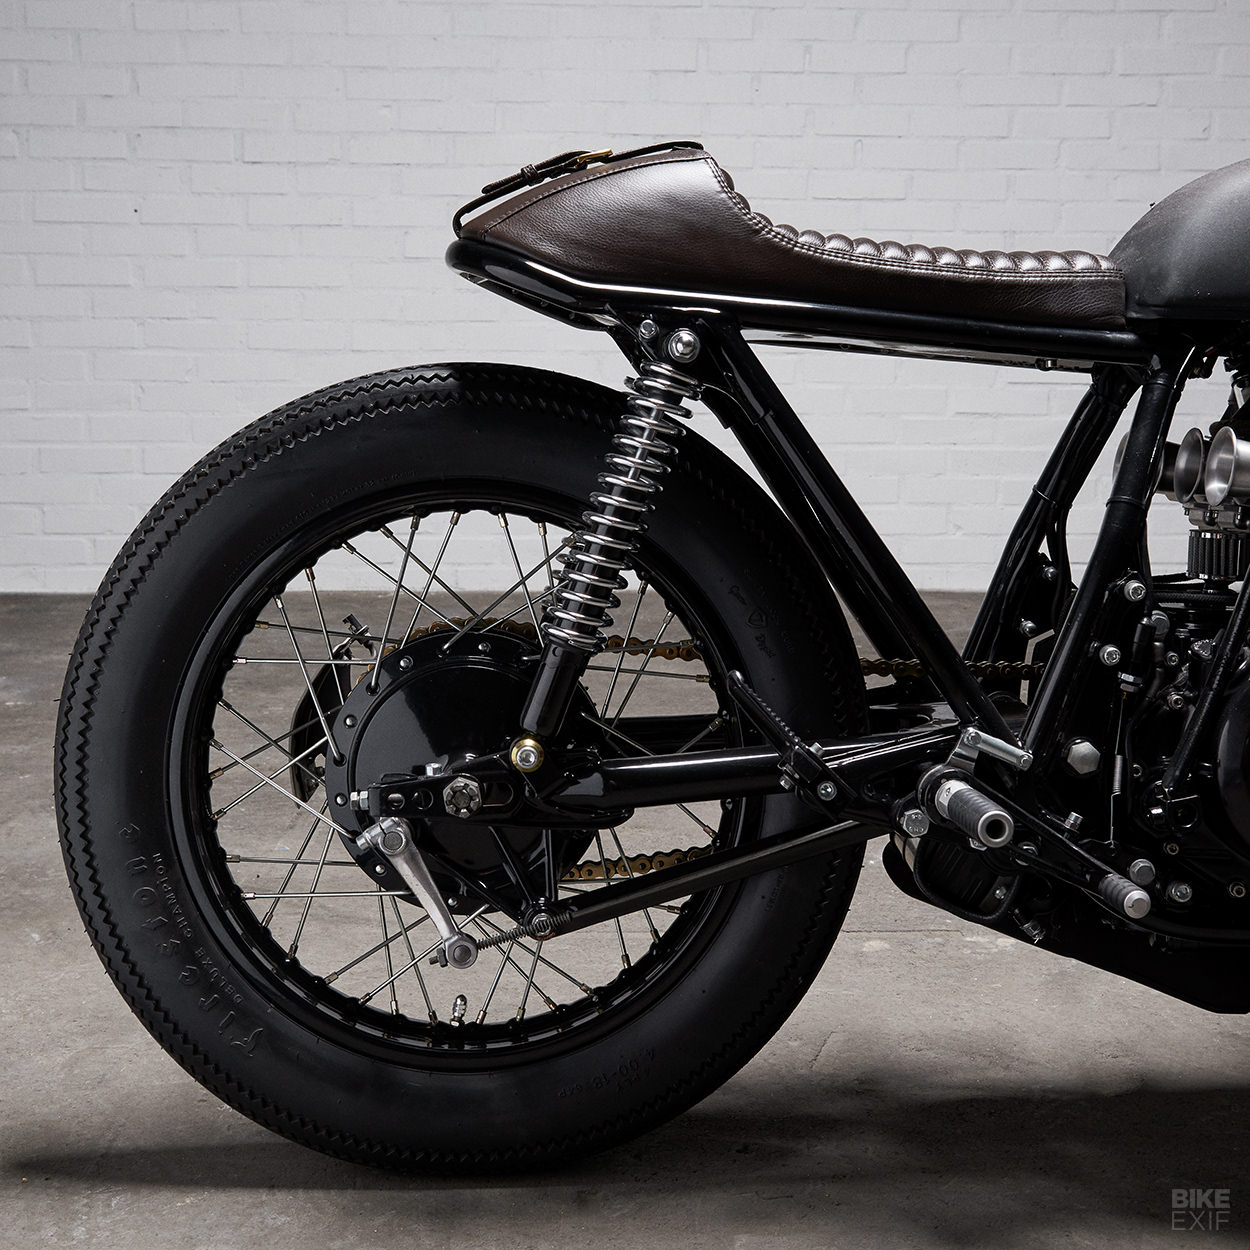 A vintage cafe racer from PAAL Motorcycles of Sweden